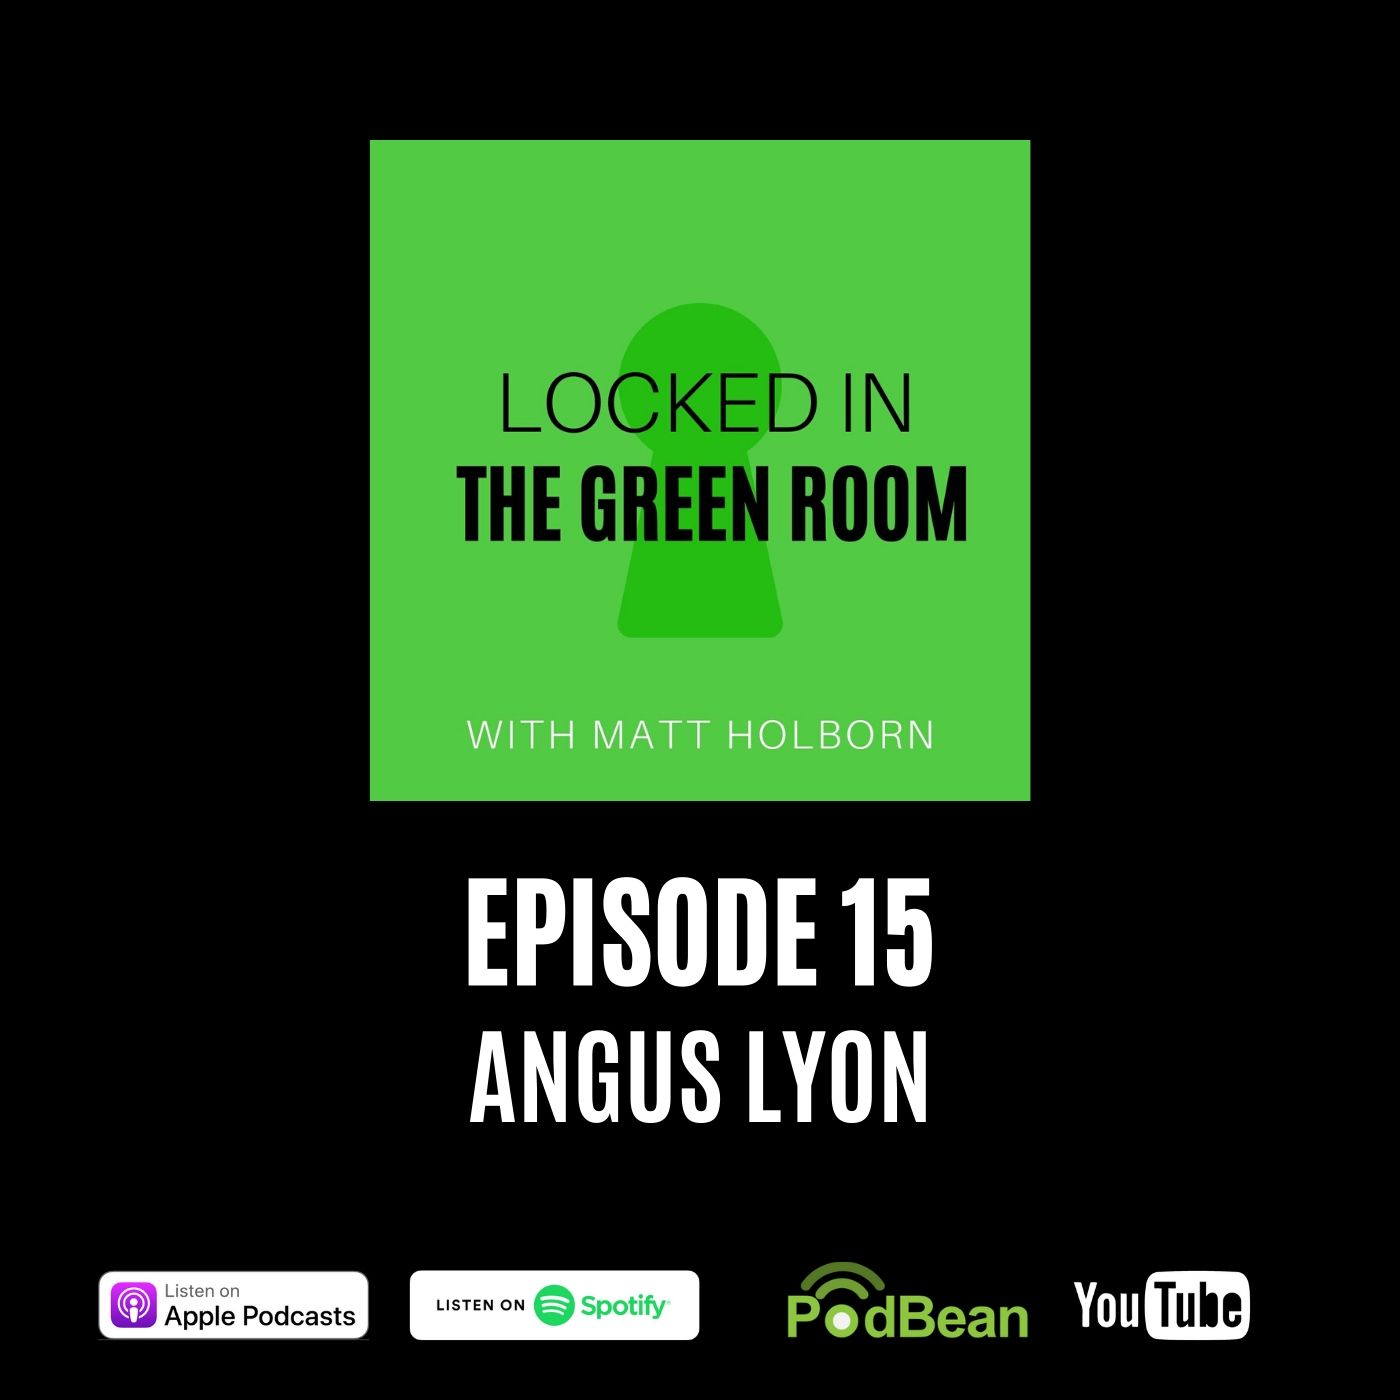 #15 Angus Lyon : Taking stock and searching for a middle ground on lockdown.